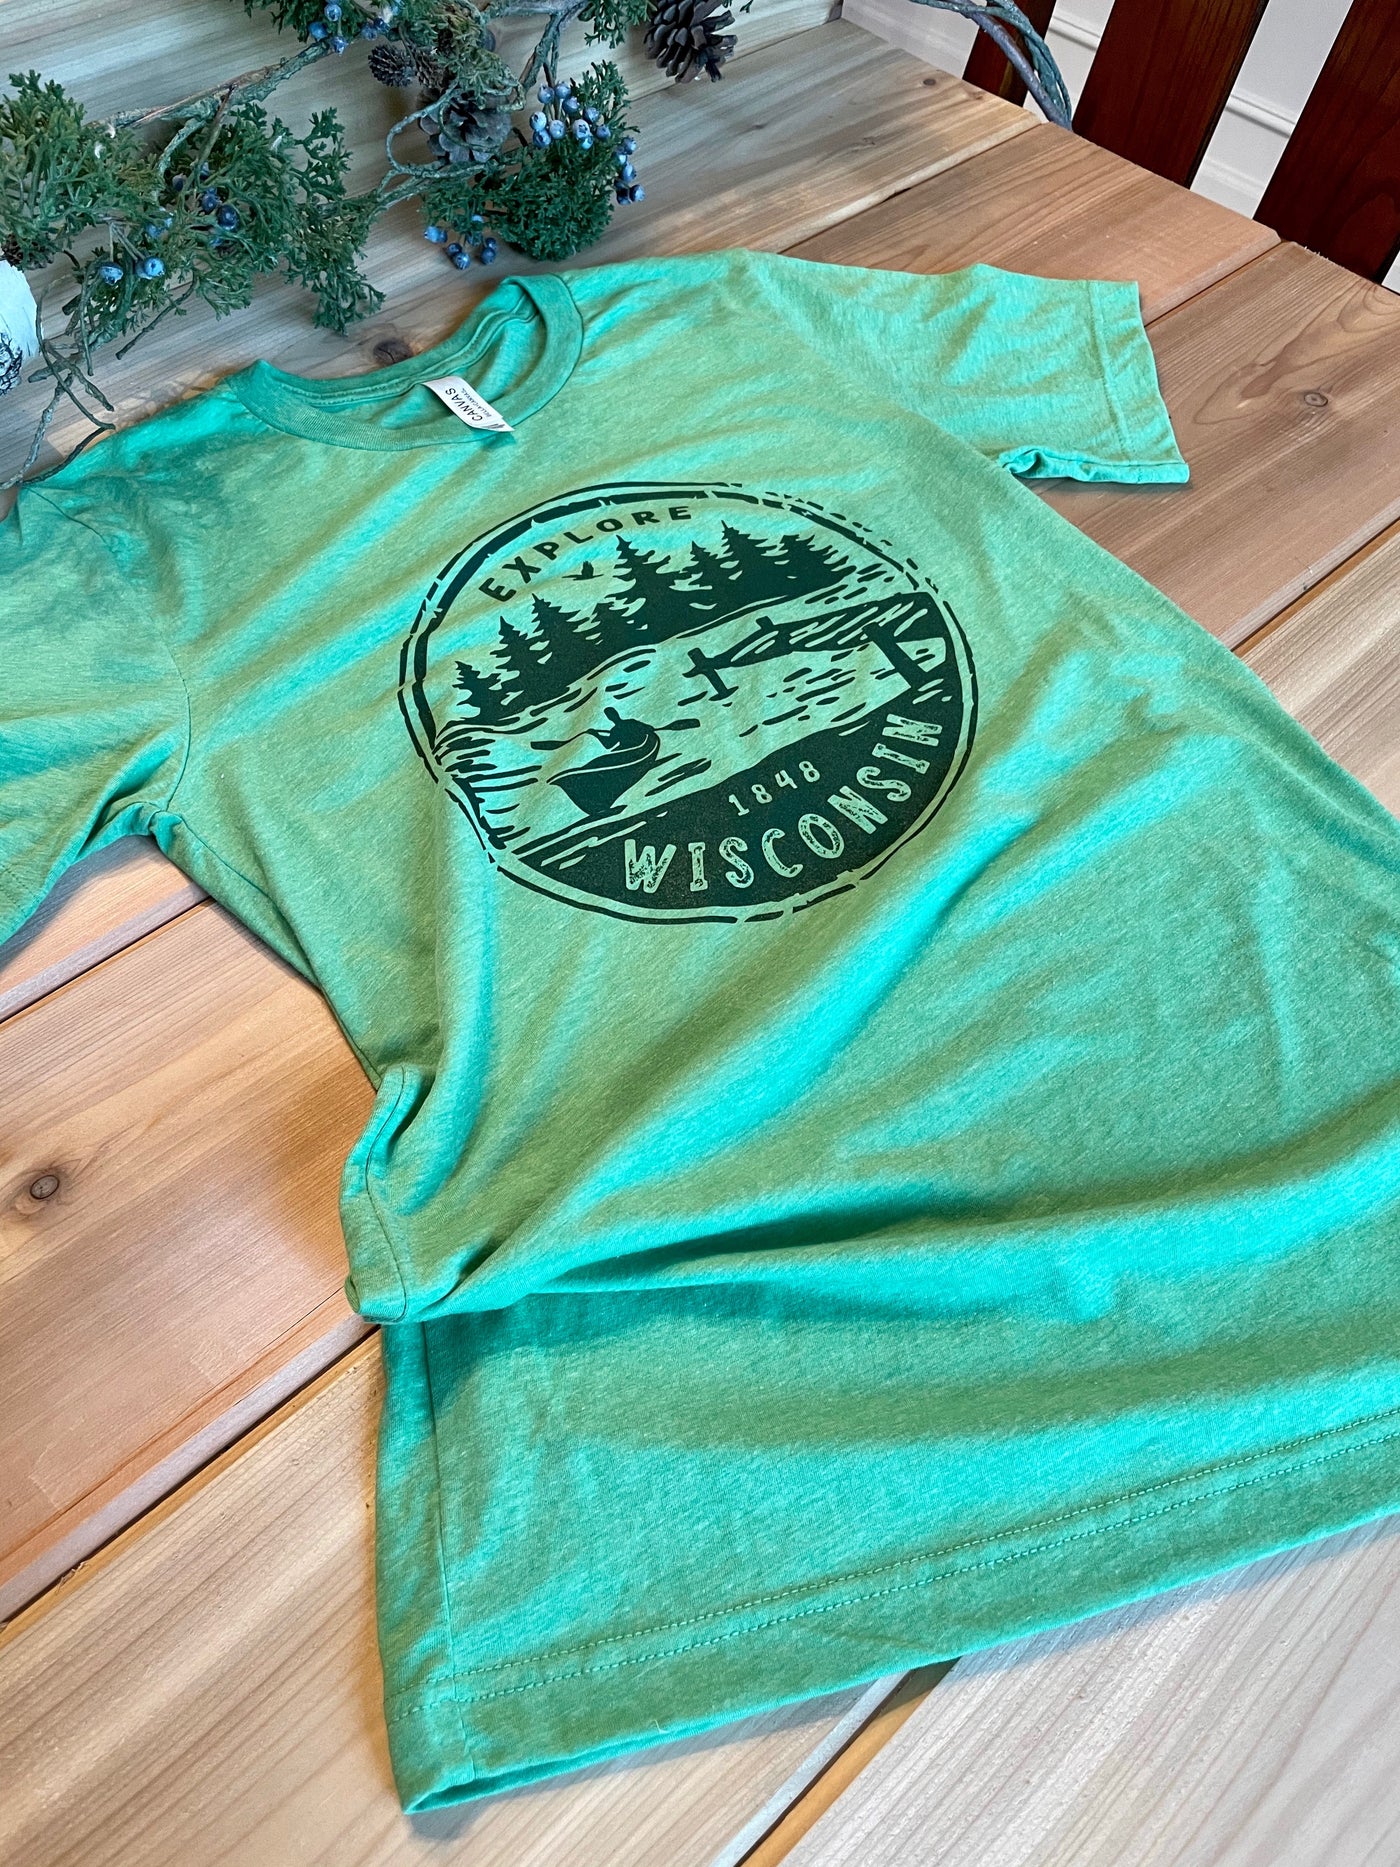 Green triblend short sleeve unisex tee with explore wisconsin paddle design in green